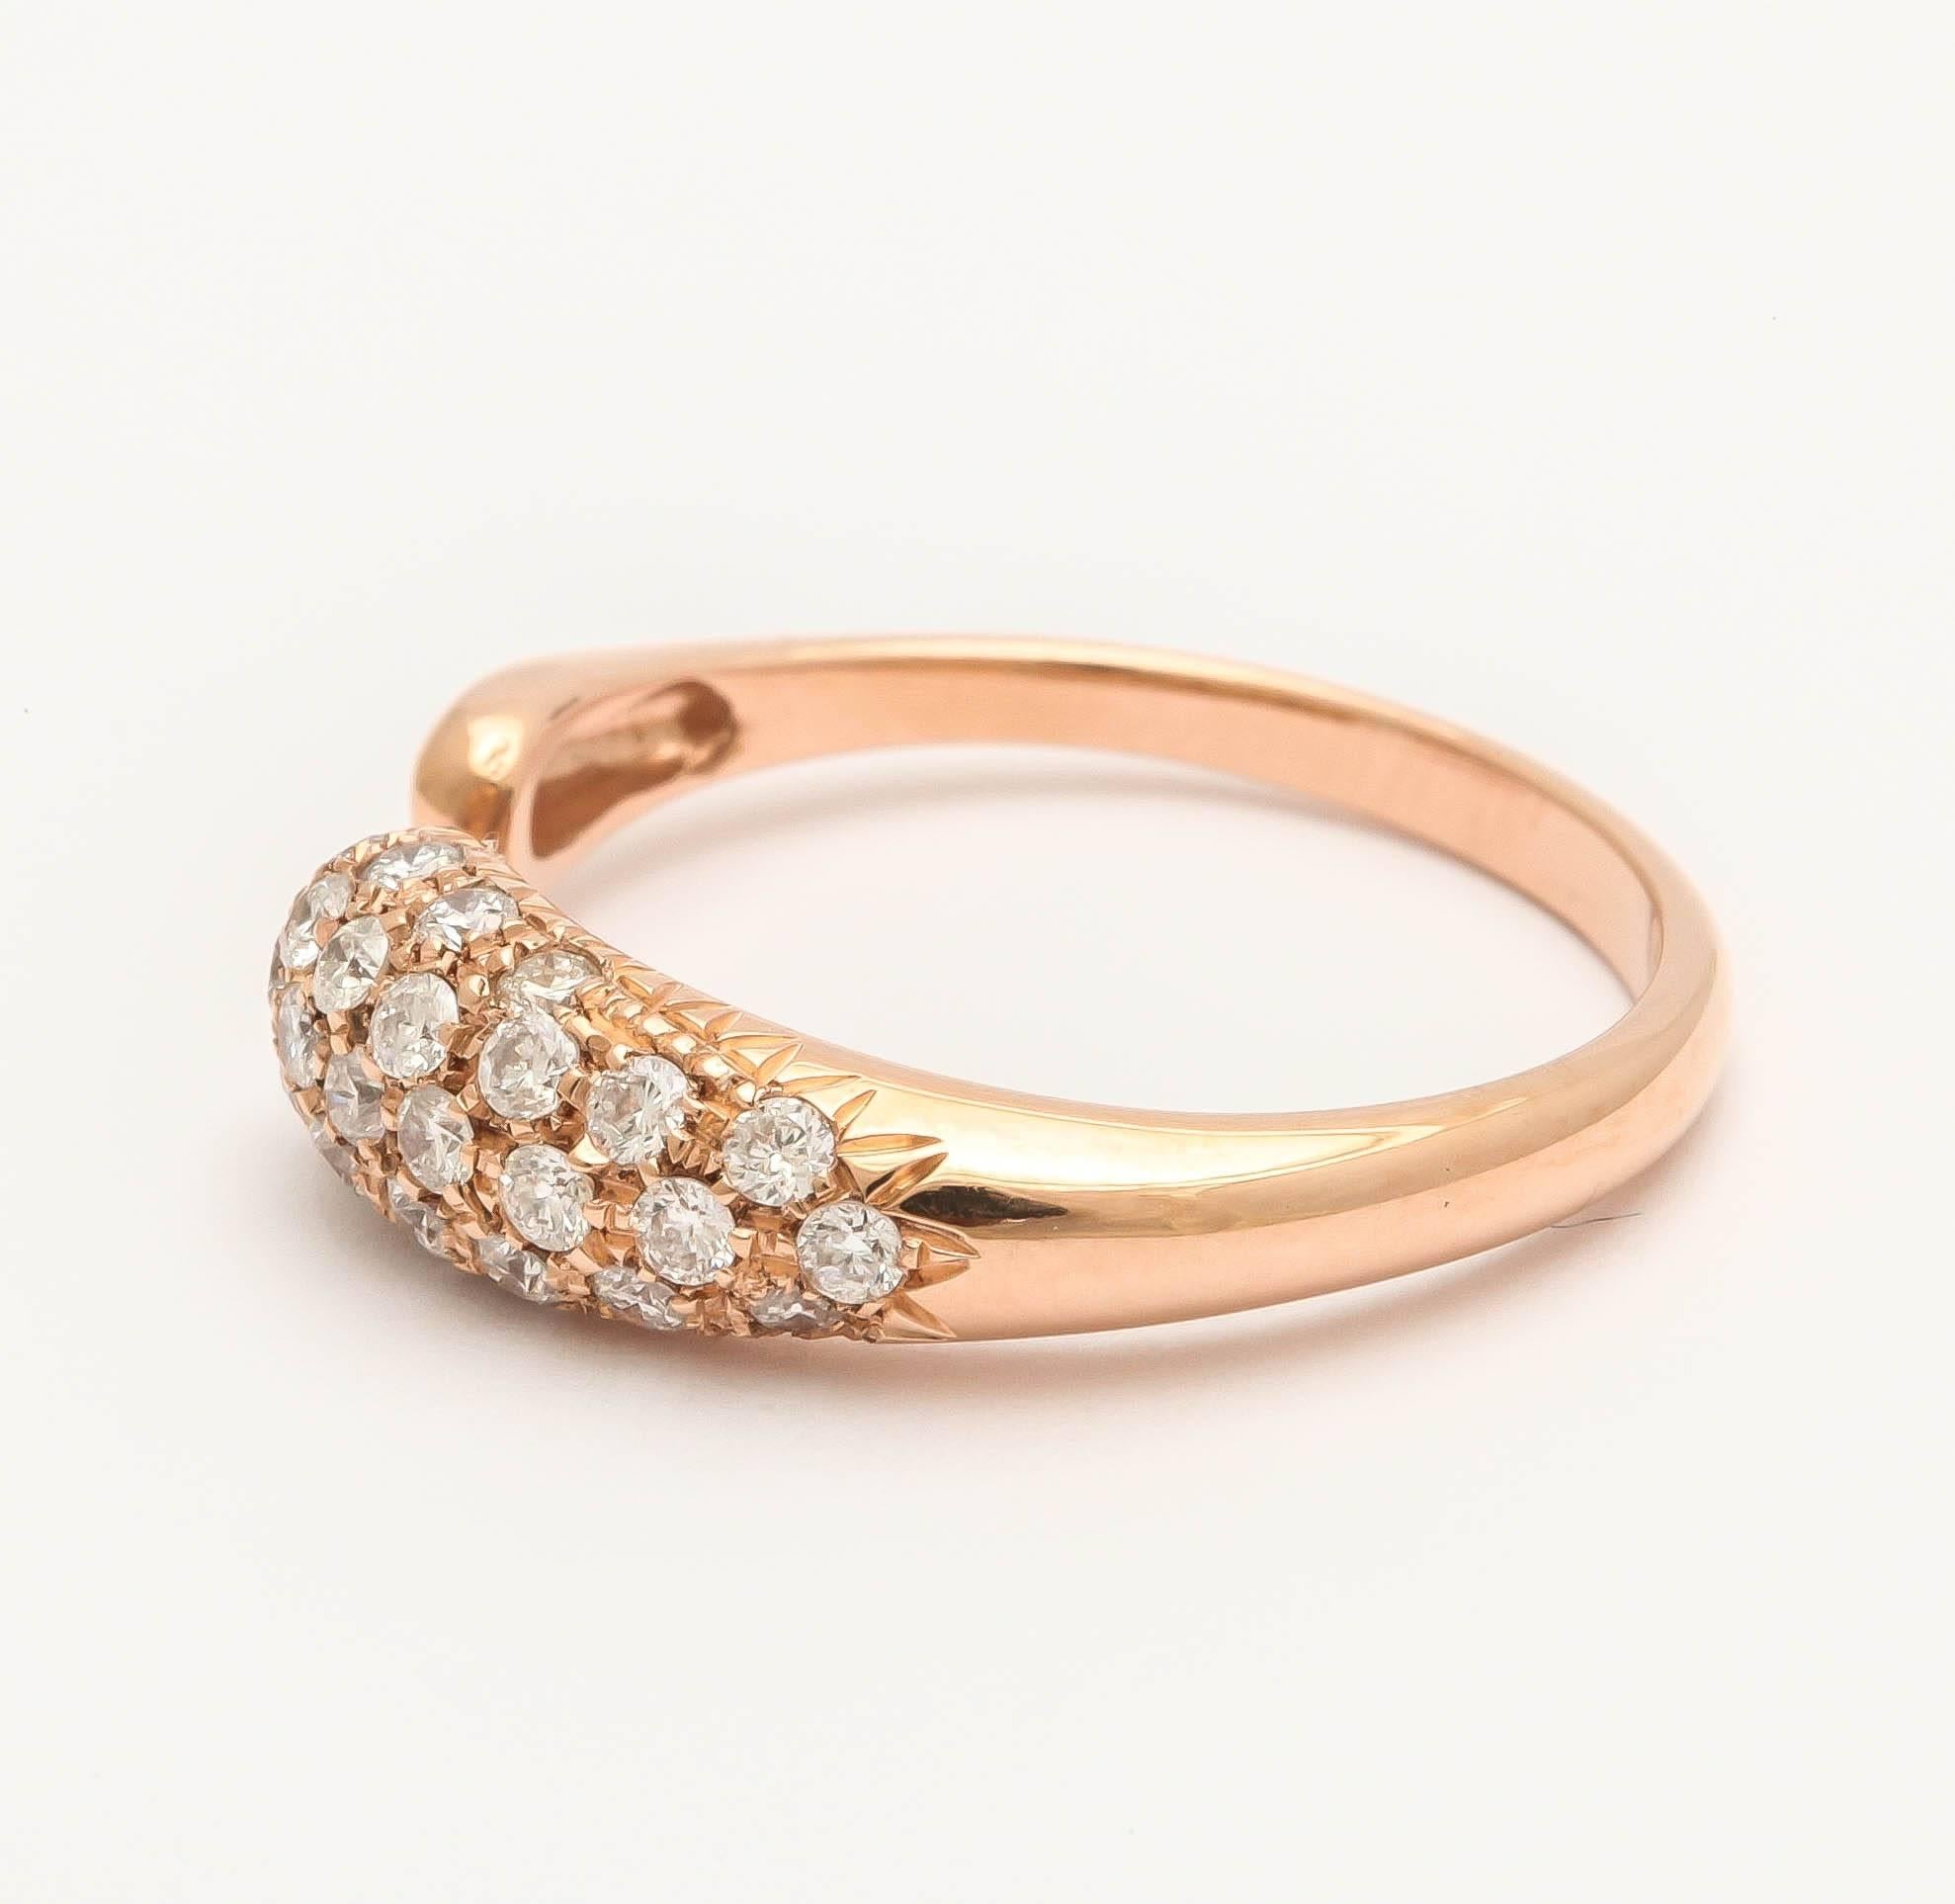 Faraone Mennella Gocce Ring In New Condition For Sale In New York, NY